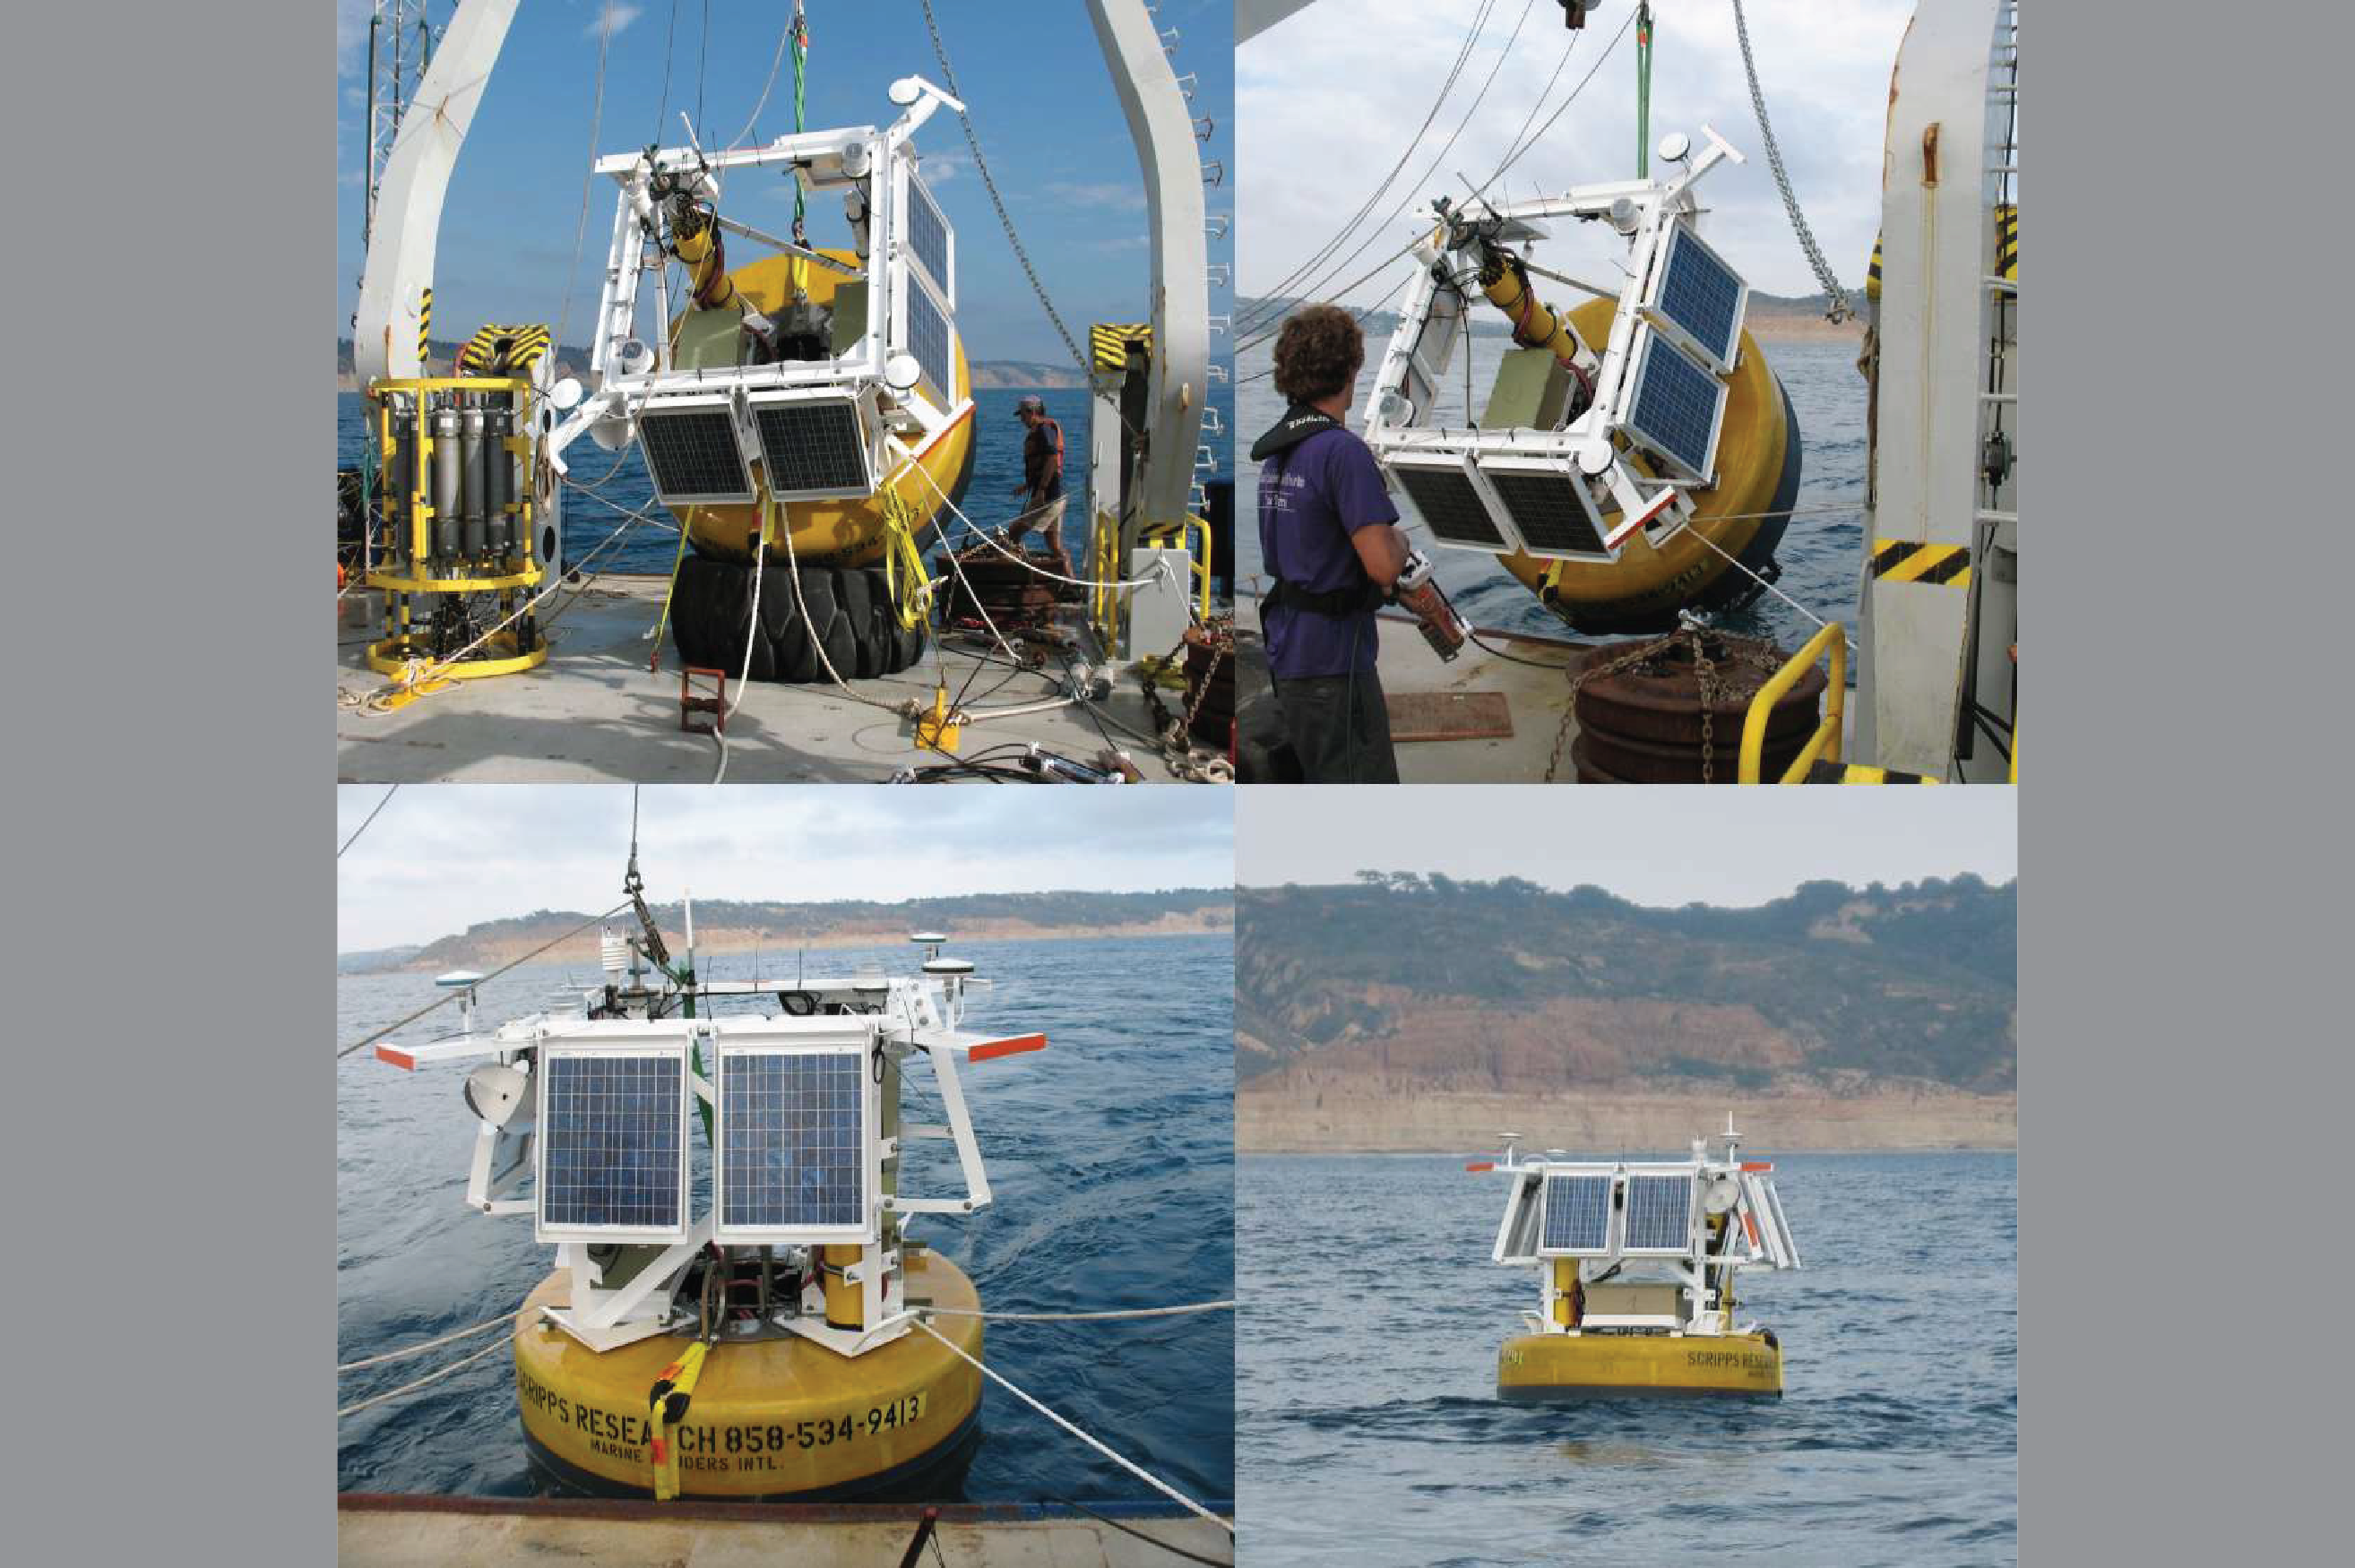 In 2008, the mooring at Del Mar was significantly modified for the GEOCE (GEOphysical and OCEanographic observatory) project, which measured tectonic seafloor motion using a combination of a highly accurate GPS sensor on the buoy, and acoustic transponders at the sea floor below the buoy.